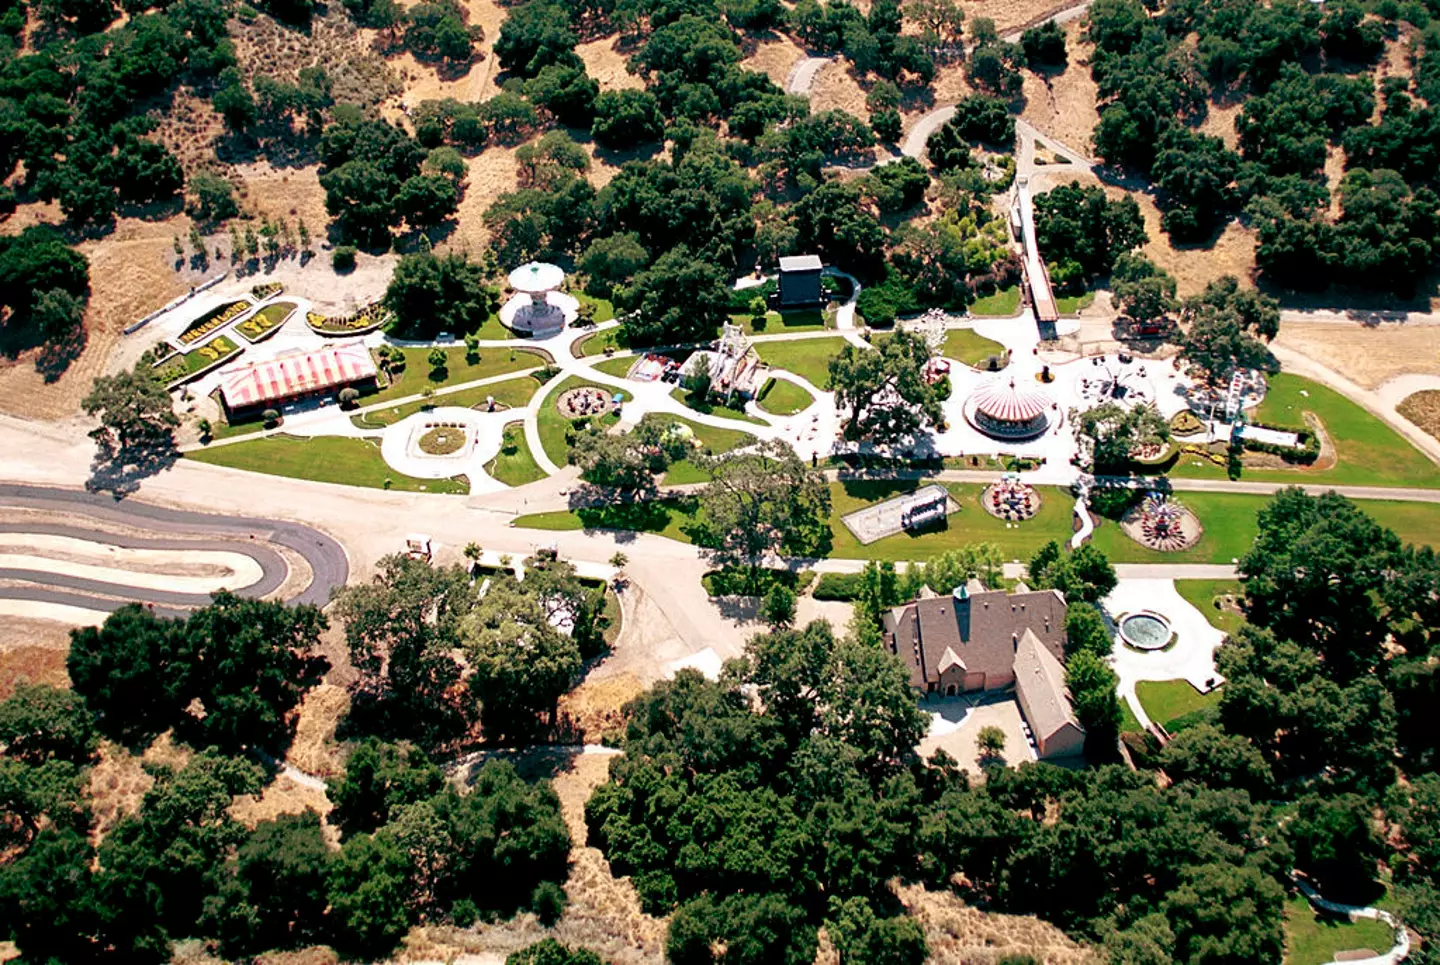 The Neverland ranch in its heyday. (Jason Kirk/Getty Images)